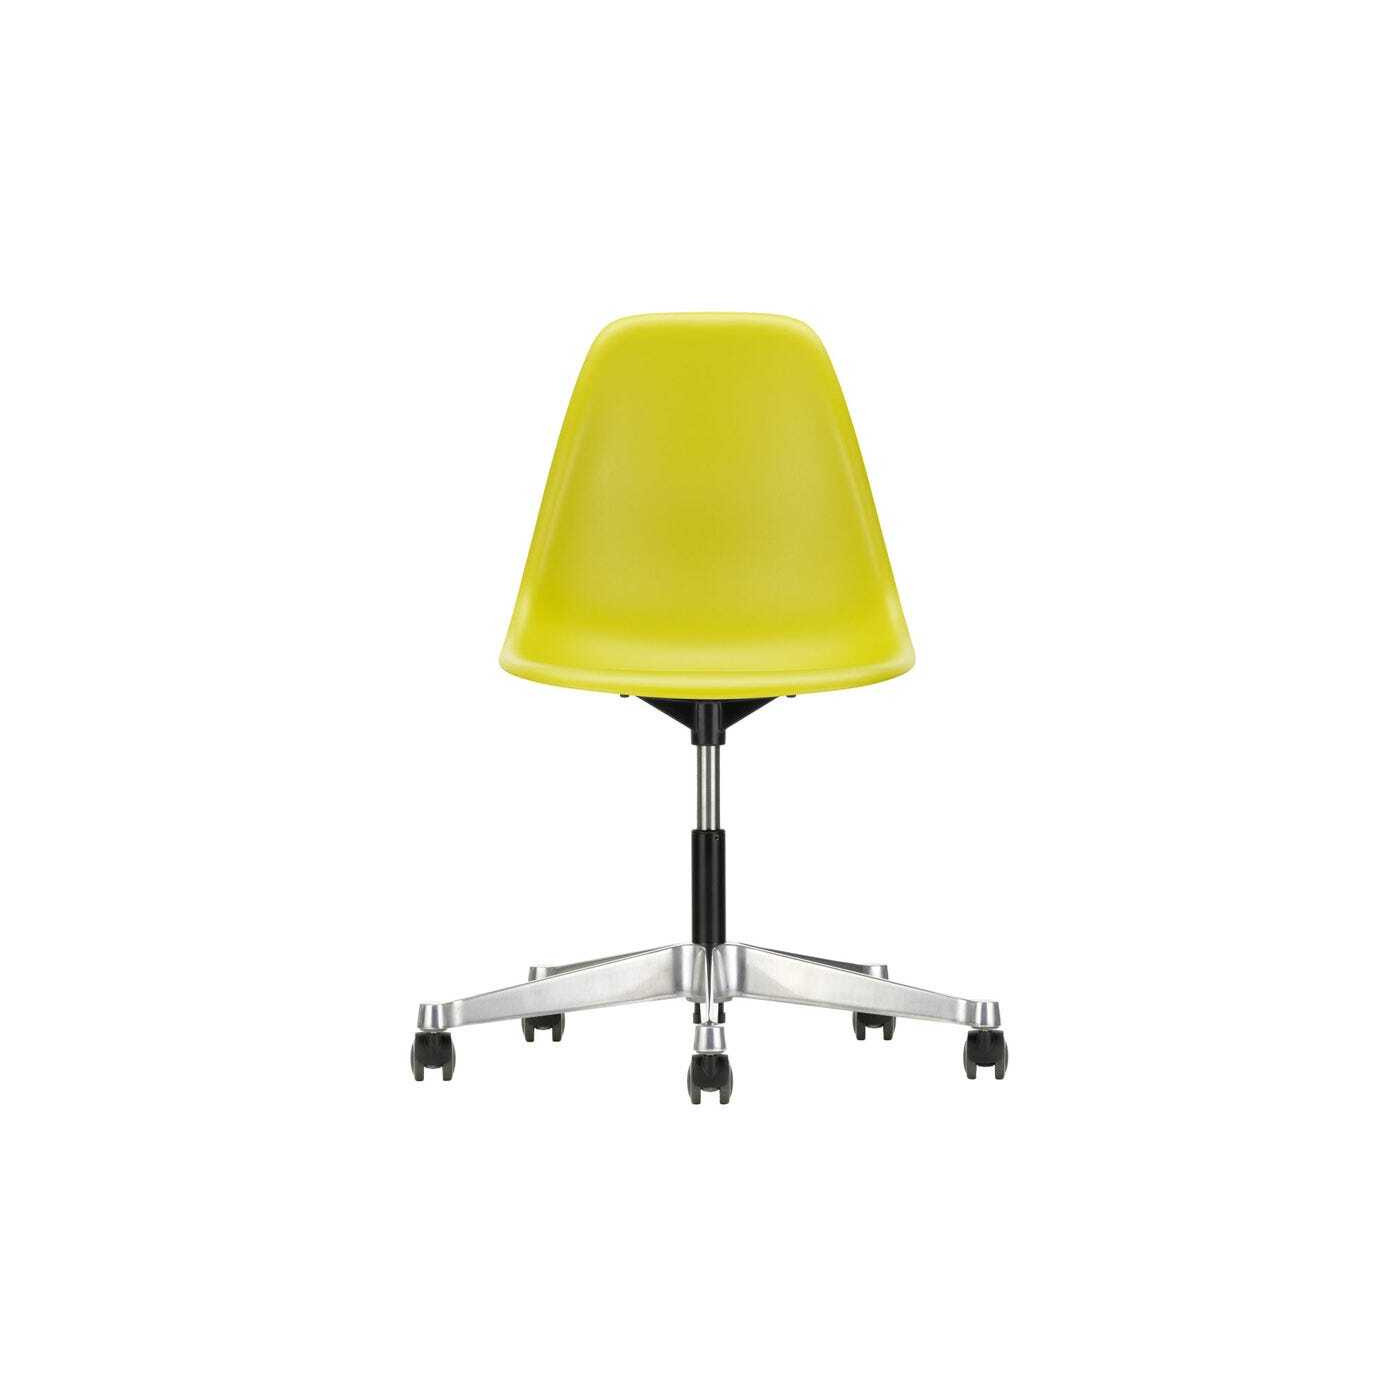 Vitra Eames PSCC Office Chair 34 Mustard Polished - image 1